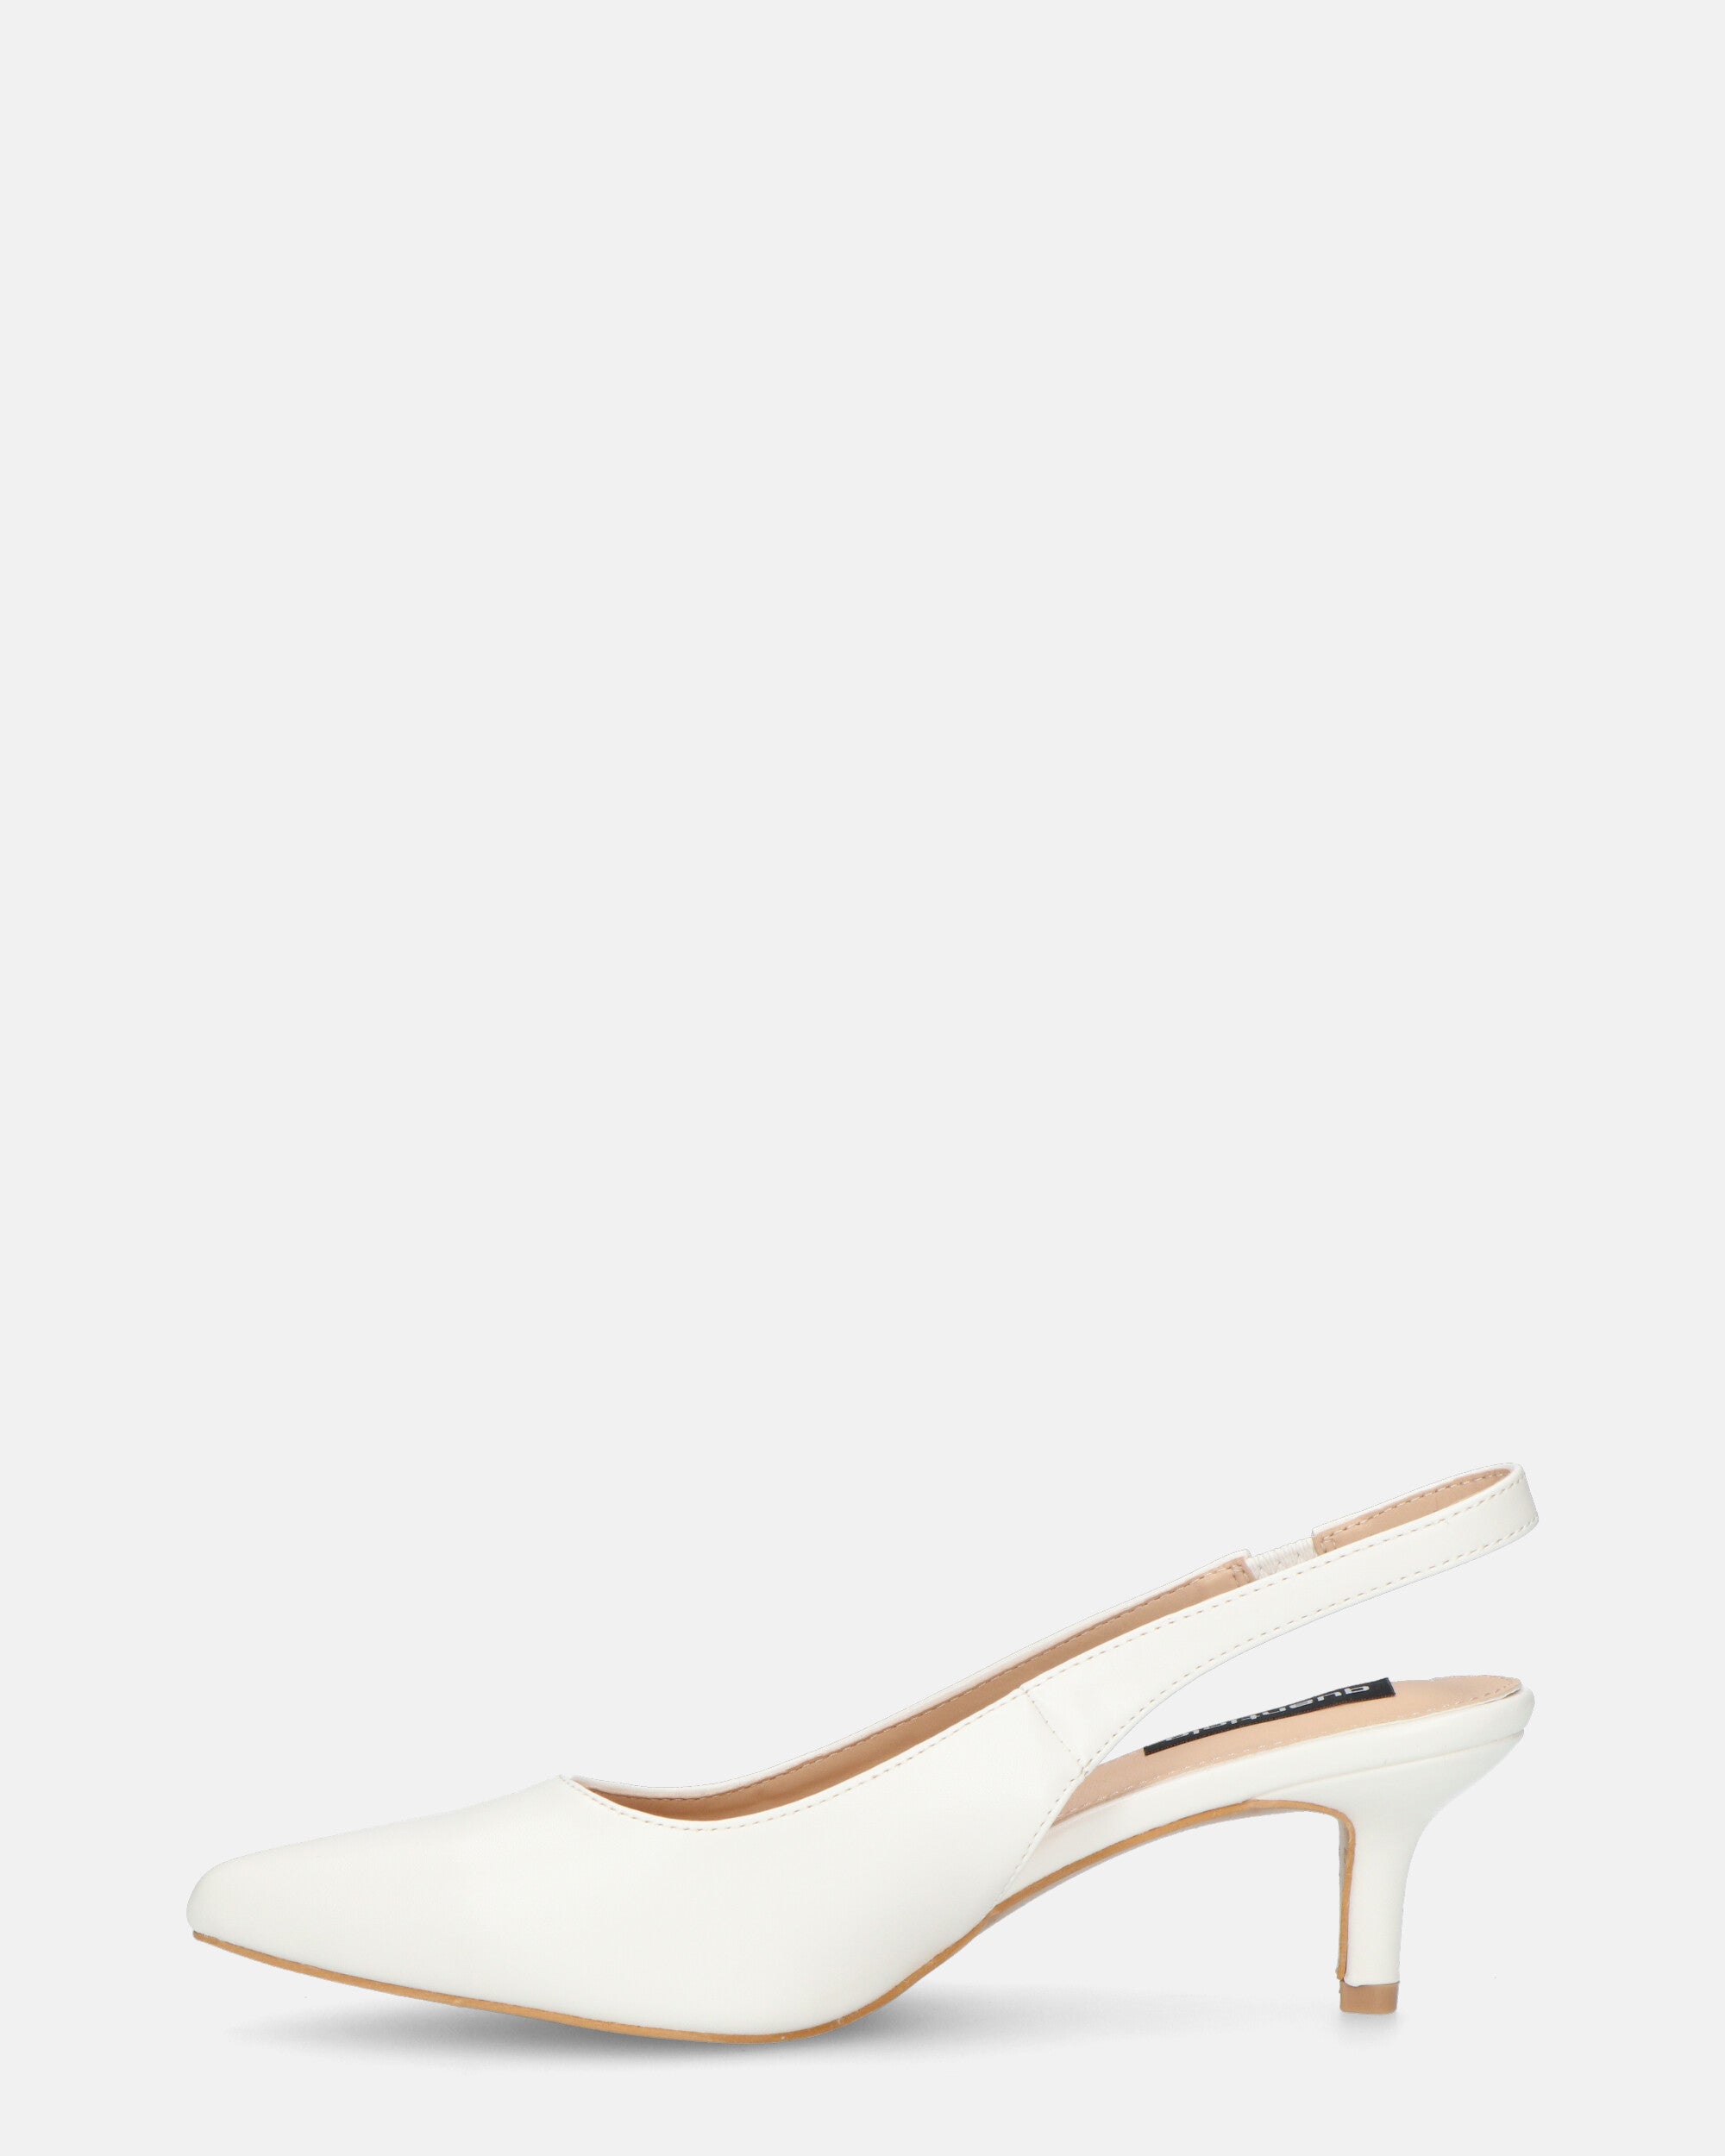 BEVERLIE - white eco-leather heeled pumps